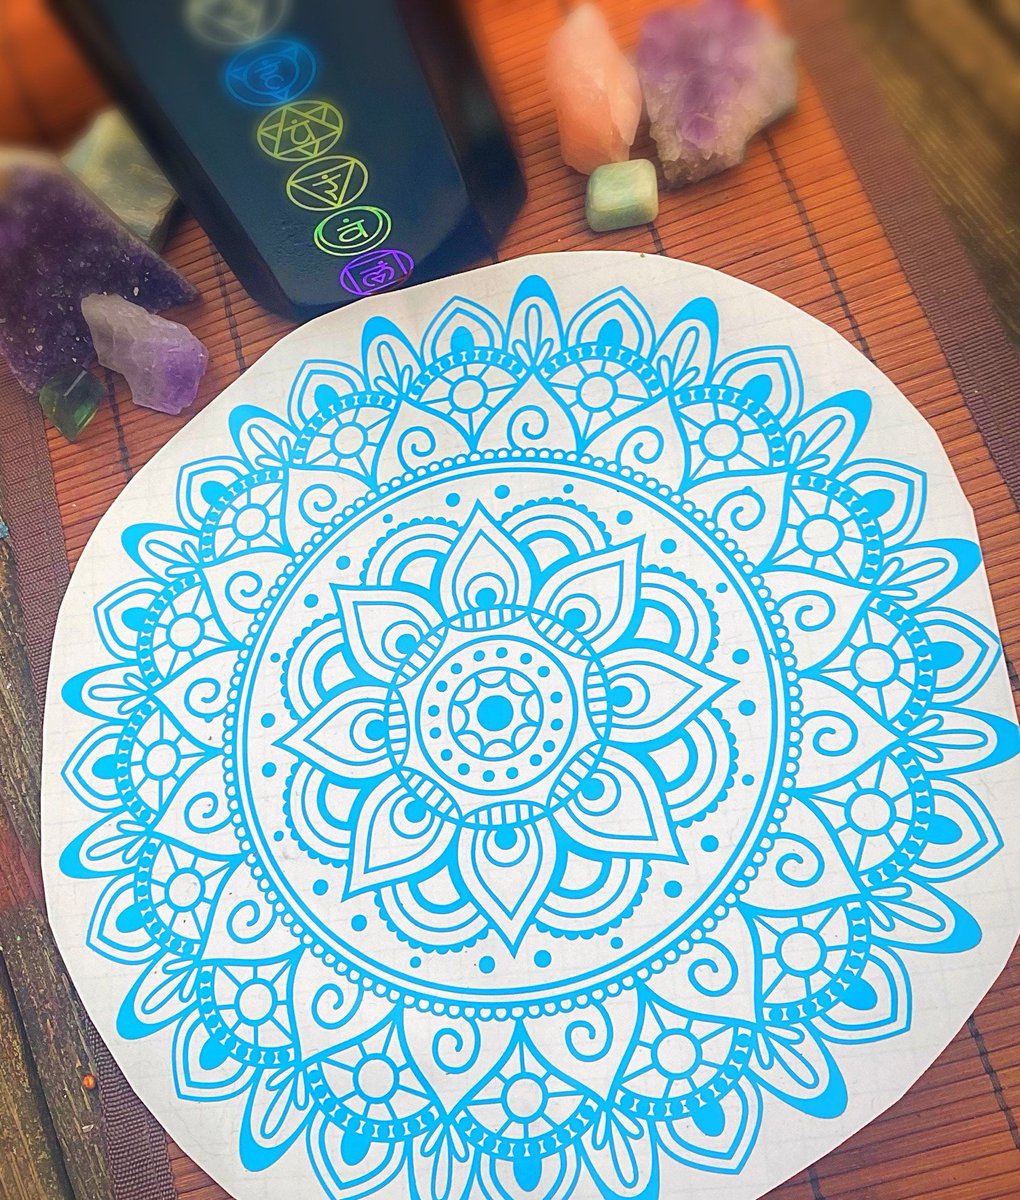 Excited to share this item from my #etsy shop: Blue Large Mandala 11x11 Wall Decal, Mirror Decal | Car Decal | Birthday Gift #blue #mediation #birthday #yogadecor #wallstickers #largemandala #bluemandala #giftsforher etsy.me/3u7lWvV